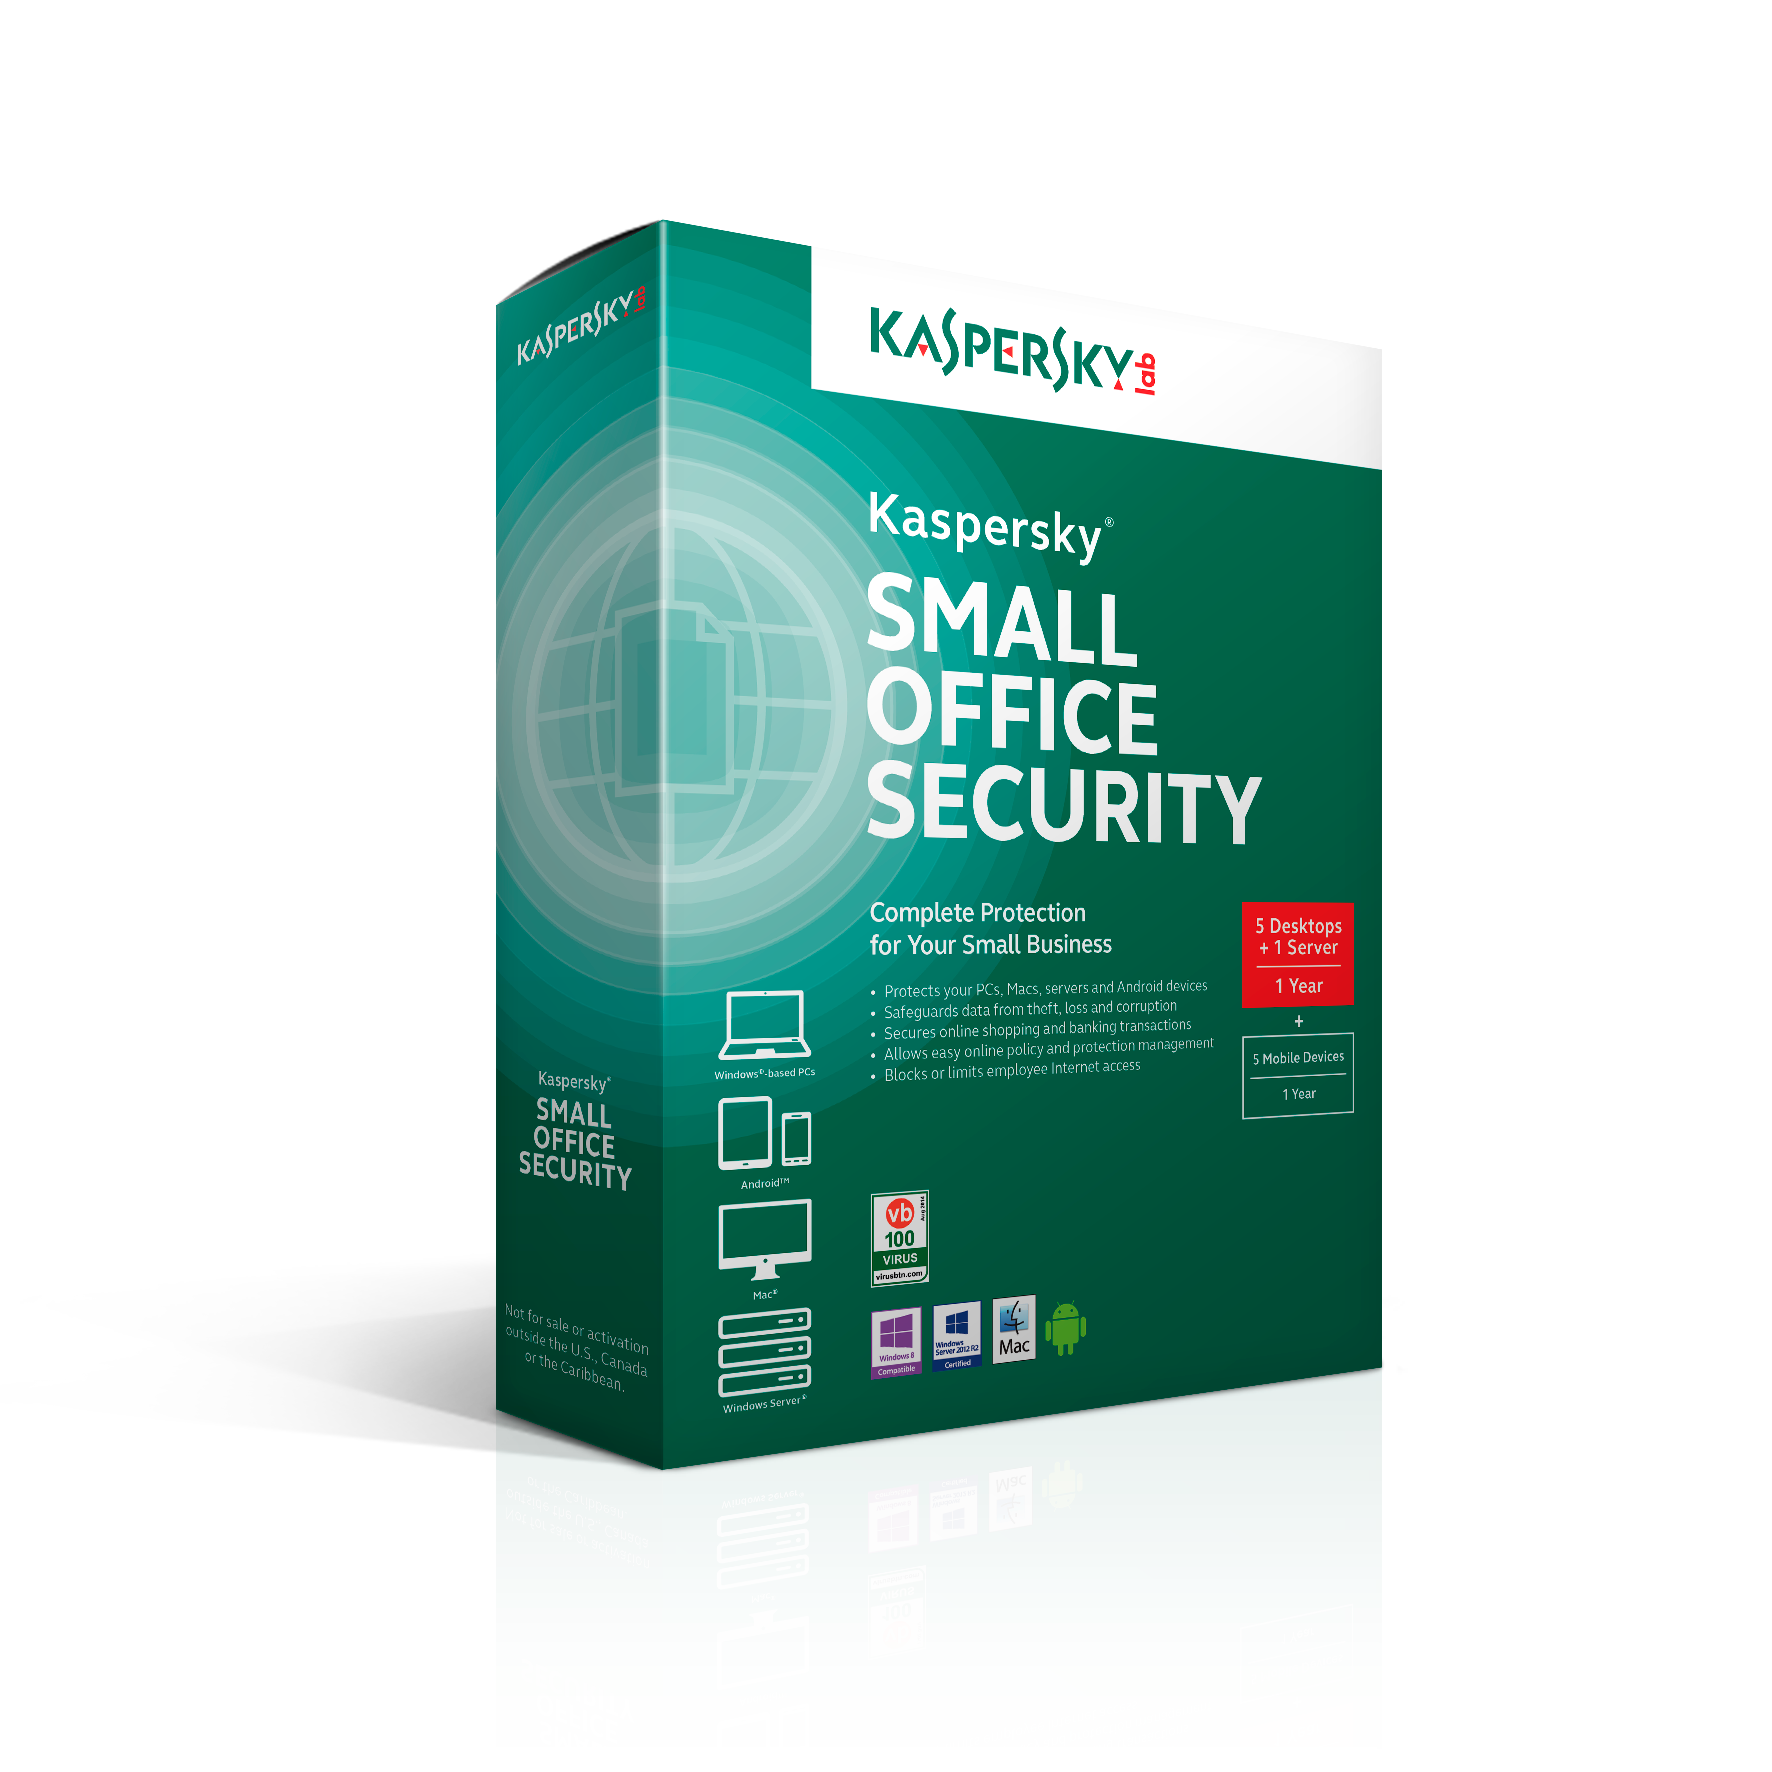 Kaspersky small office security 5